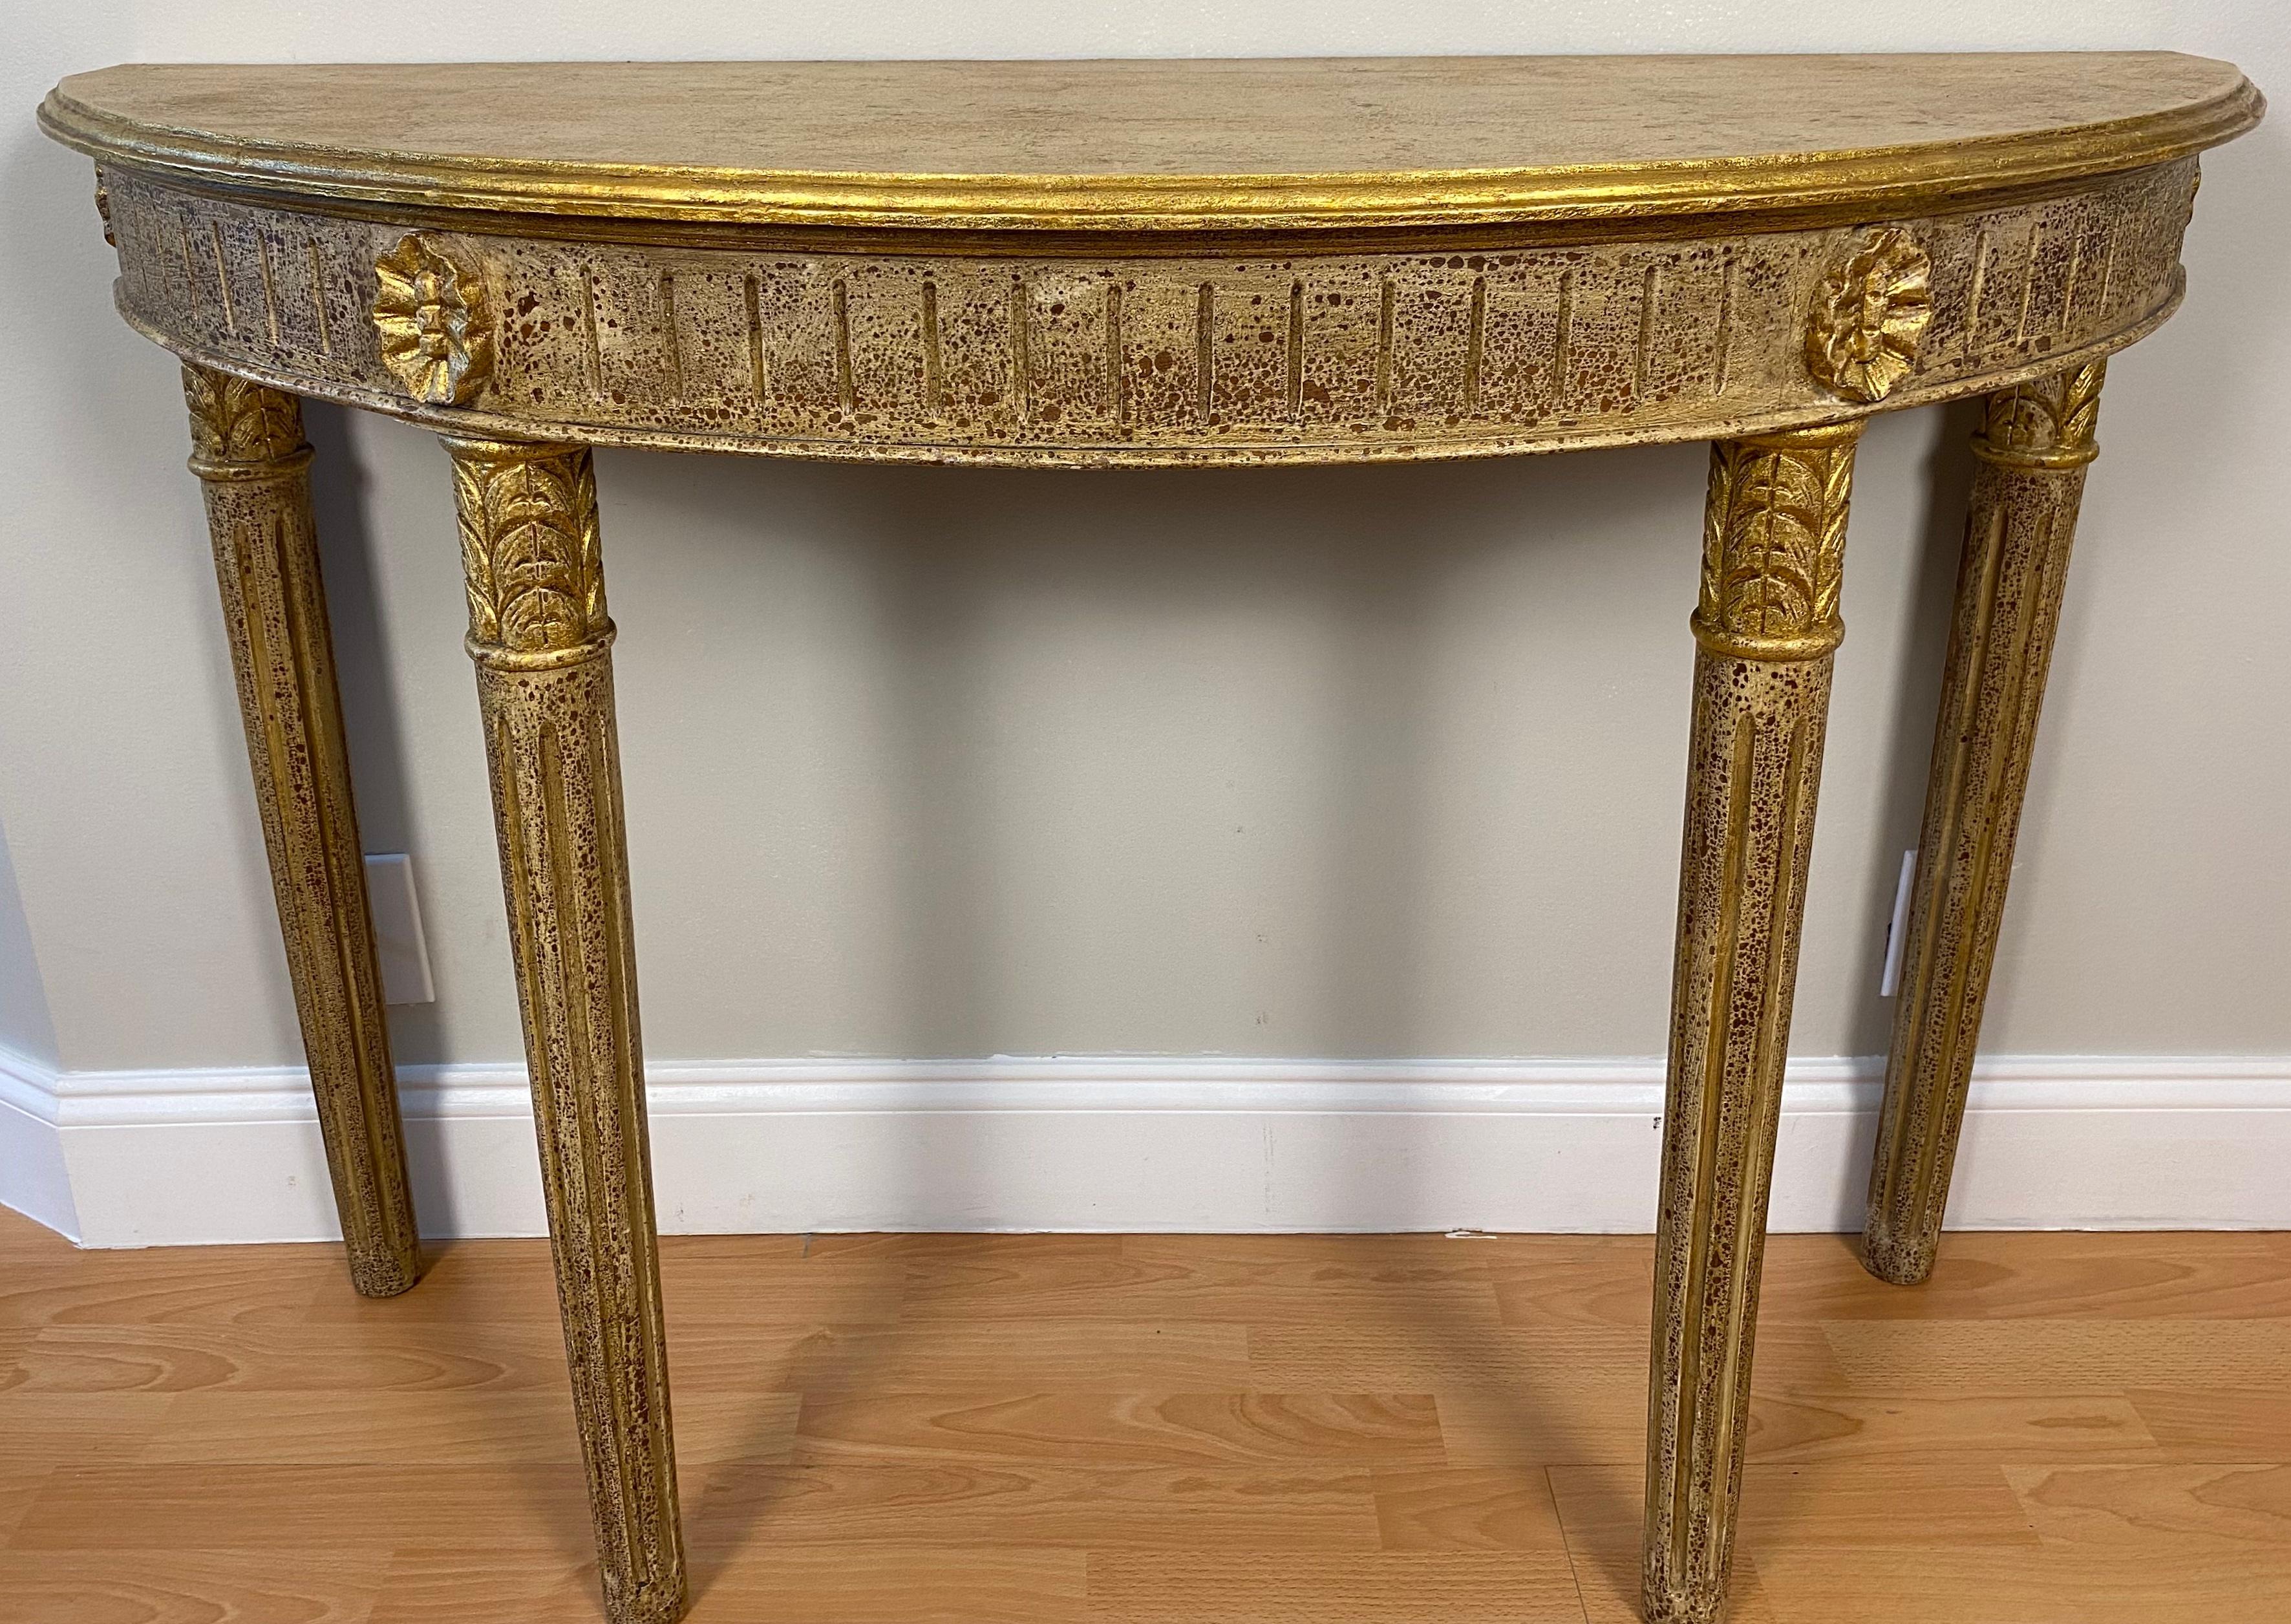 A good quality demi-lune or half moon console table from the early 20th century. This table is half-moon shaped with beautiful hand-carved details of leaves and flowers on its apron. 

French stylized design with a Hollywood Regency finish. It is